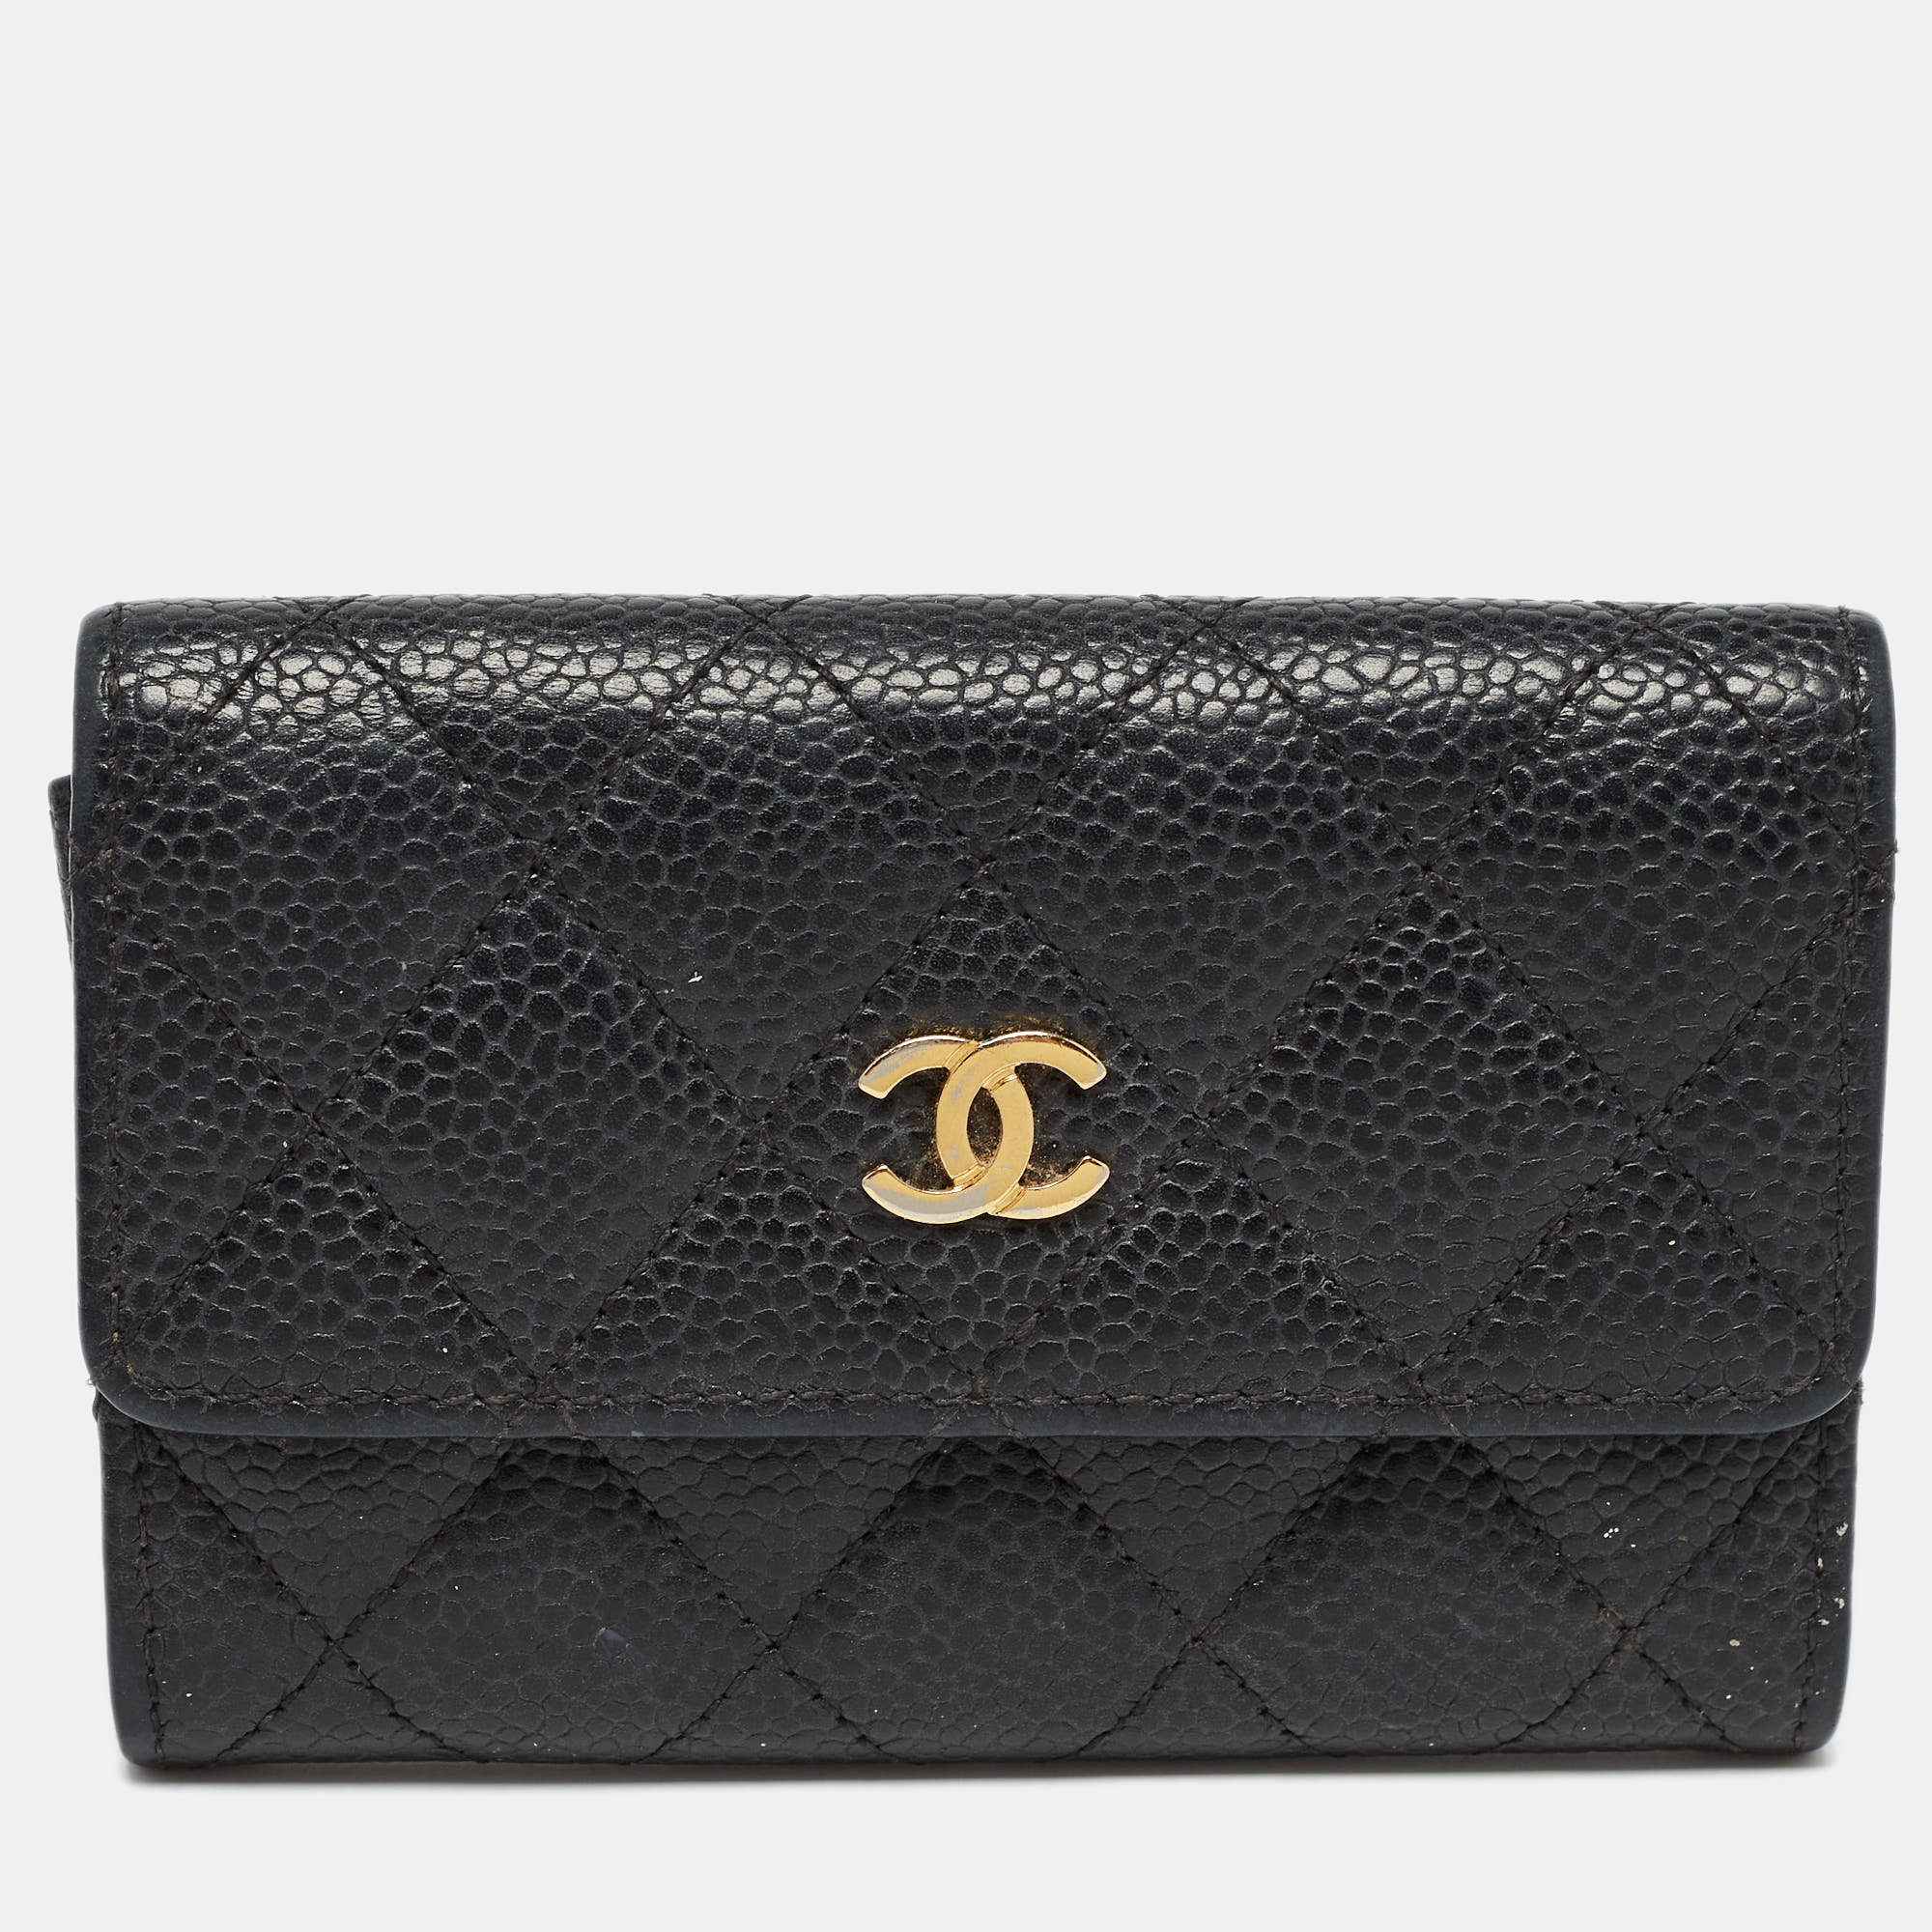 

Chanel Black Caviar Quilted Leather CC Flap Card Case